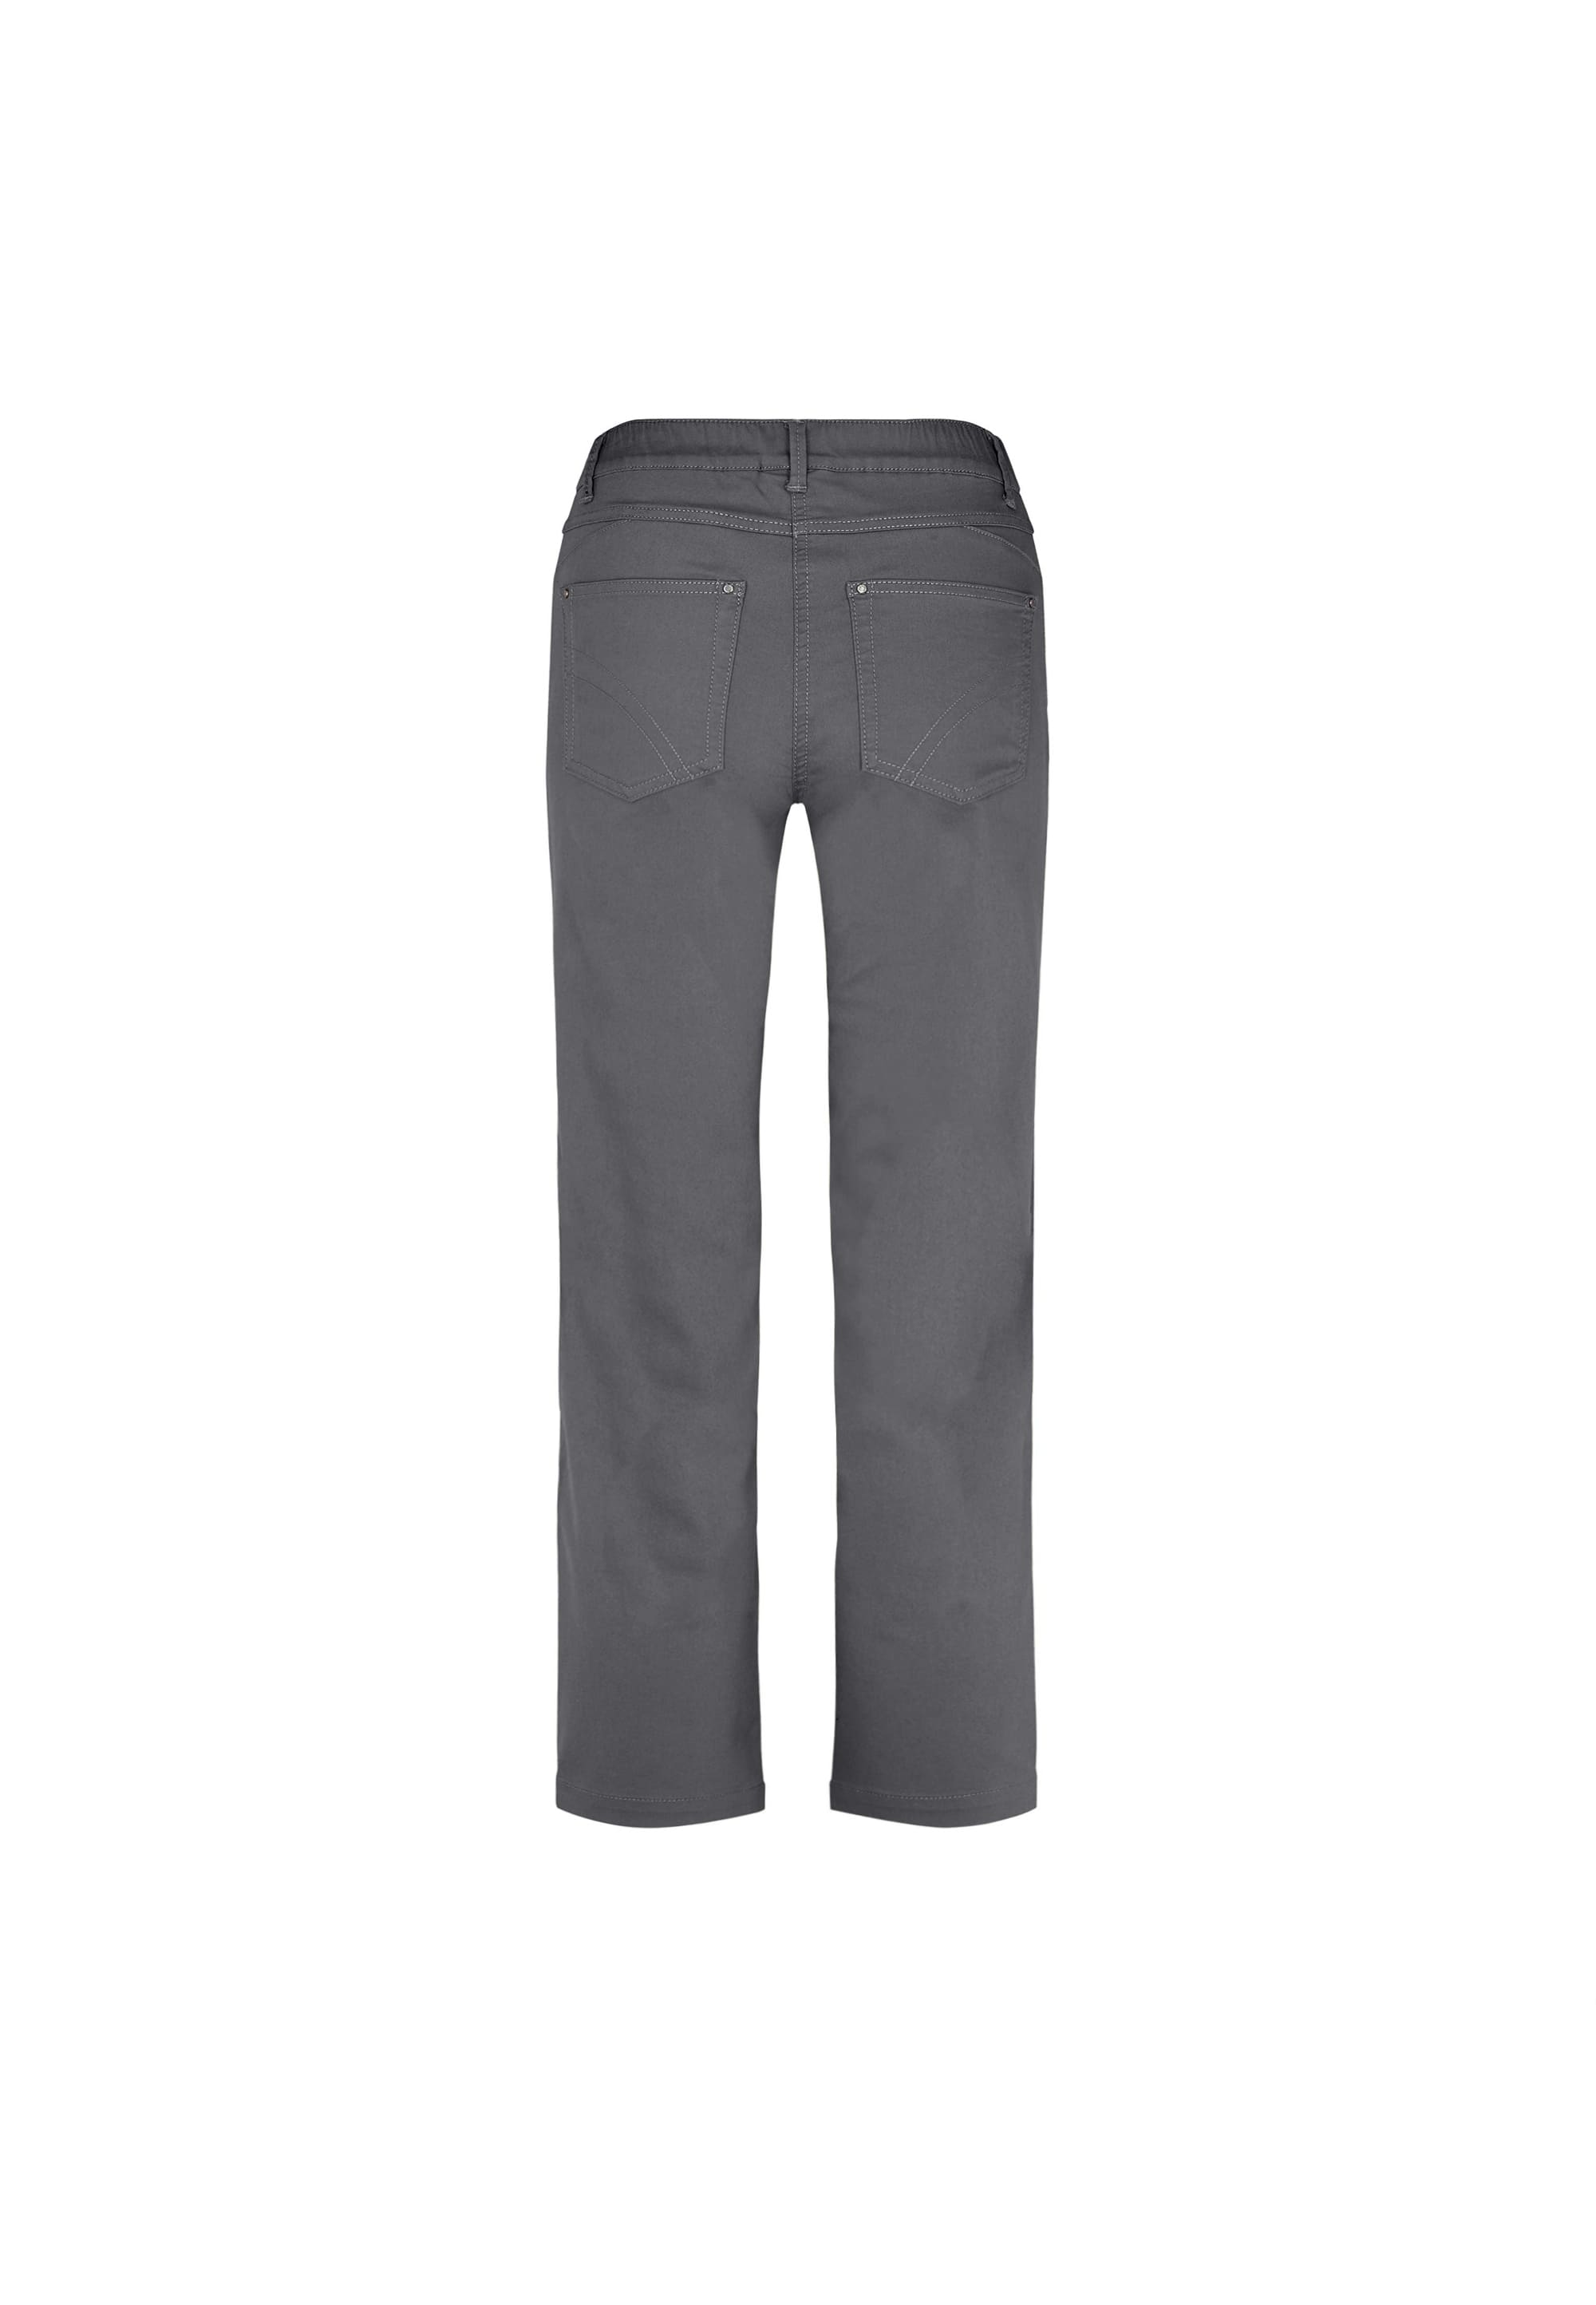 LAURIE Helen Straight - Medium Length Trousers STRAIGHT 97000 Anthracite